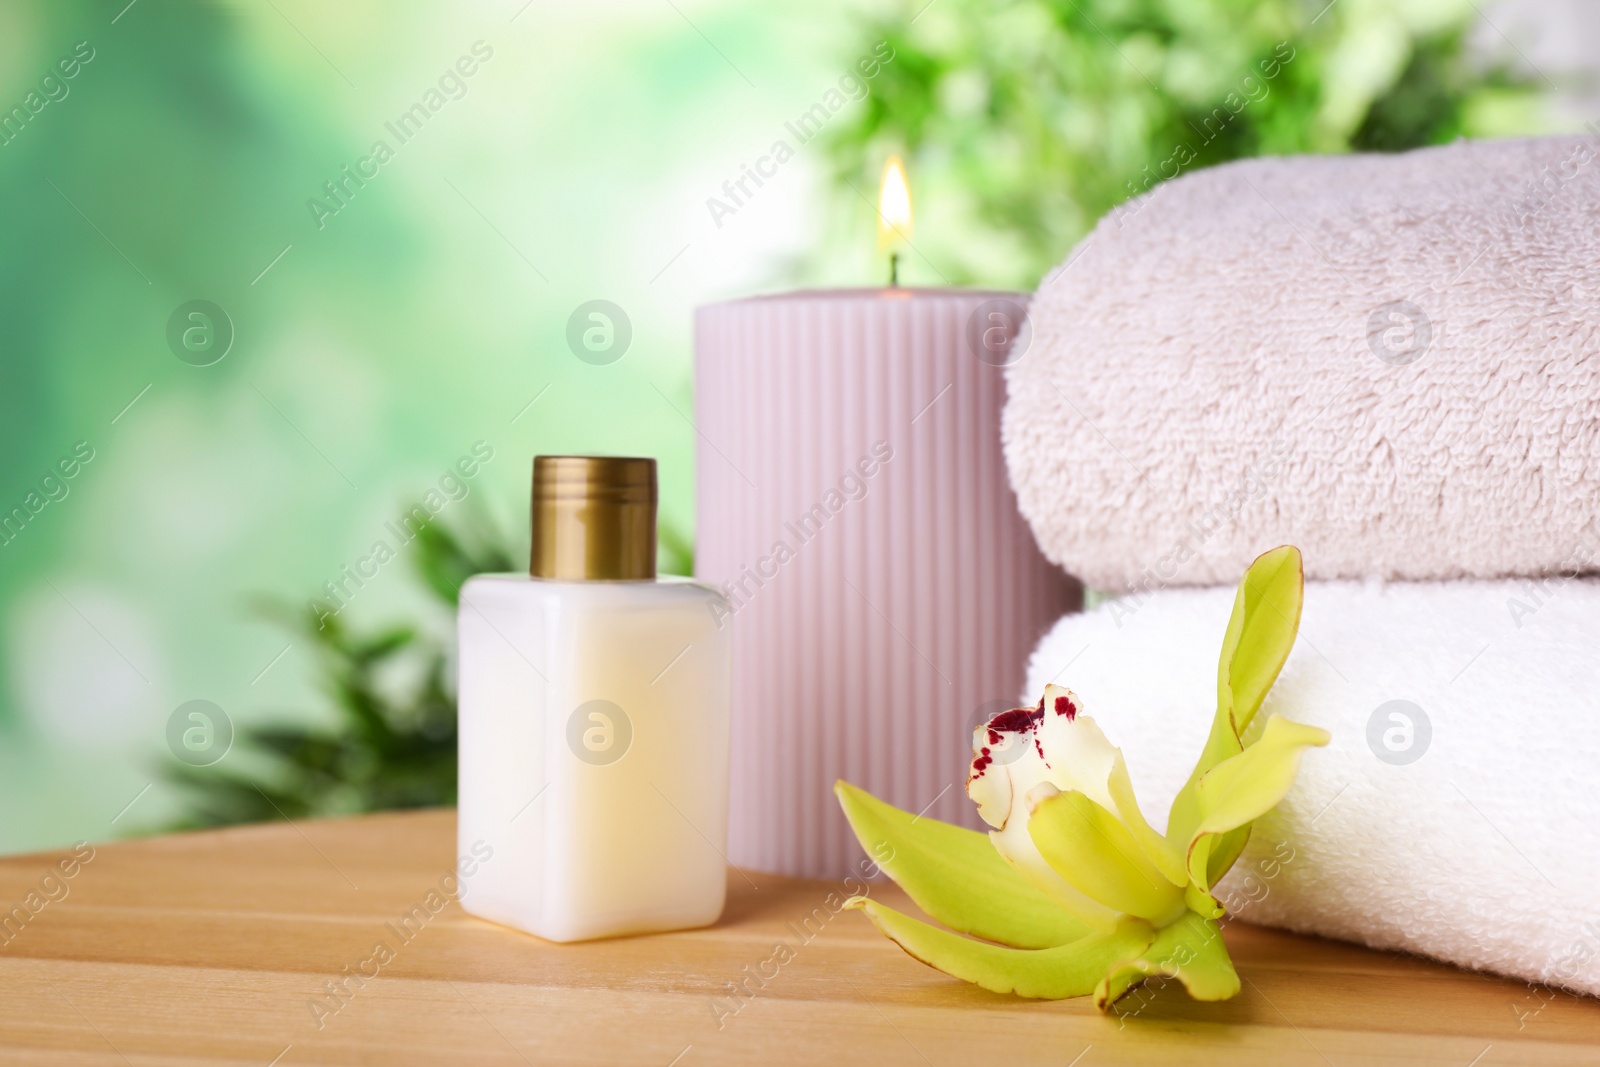 Photo of Lotion, towels and exotic flower on wooden table against blurred green background, space for text